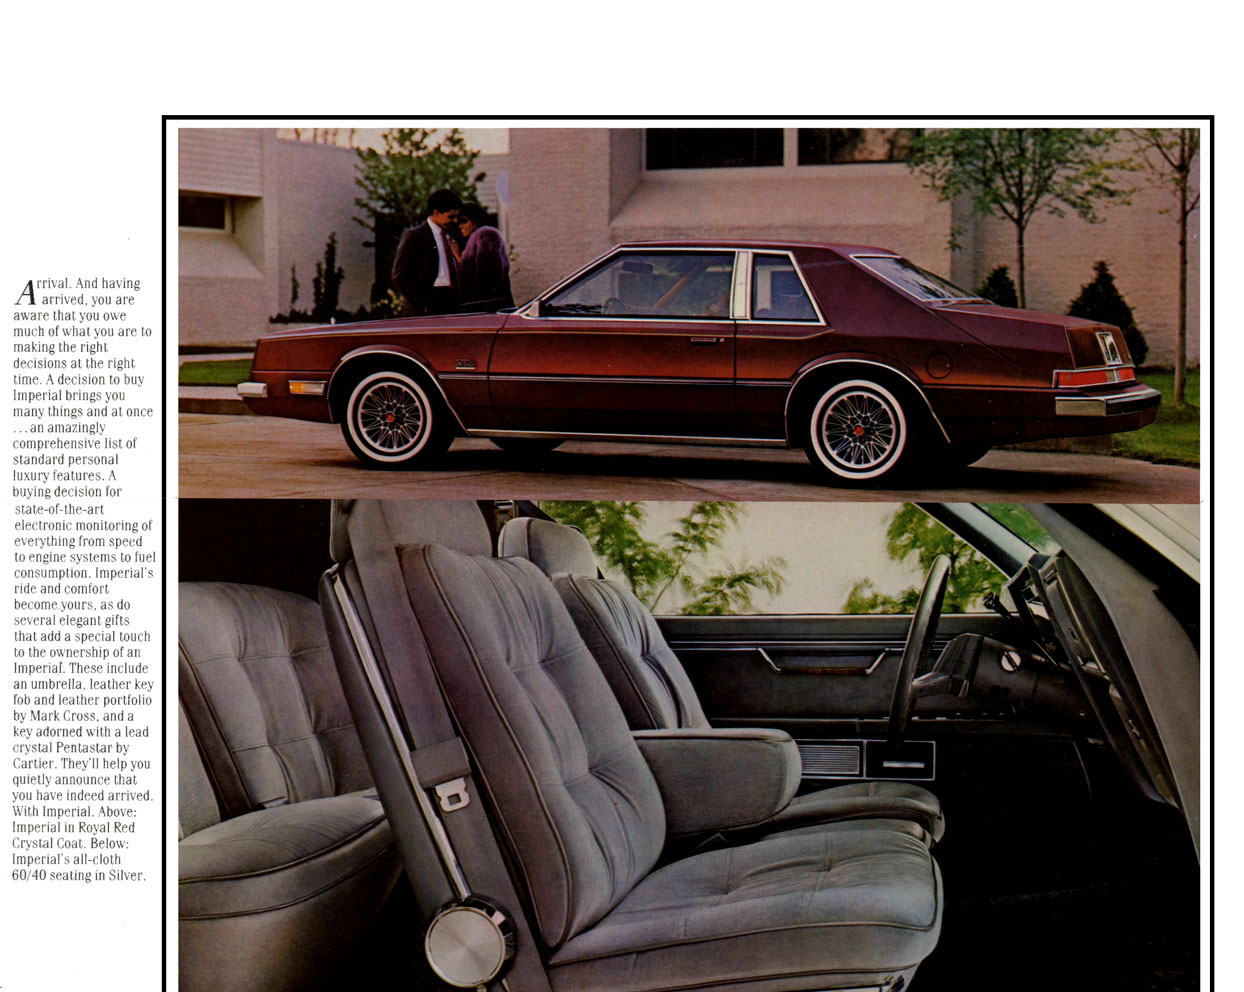 1982 Chrysler Imperial Brochure Page 6